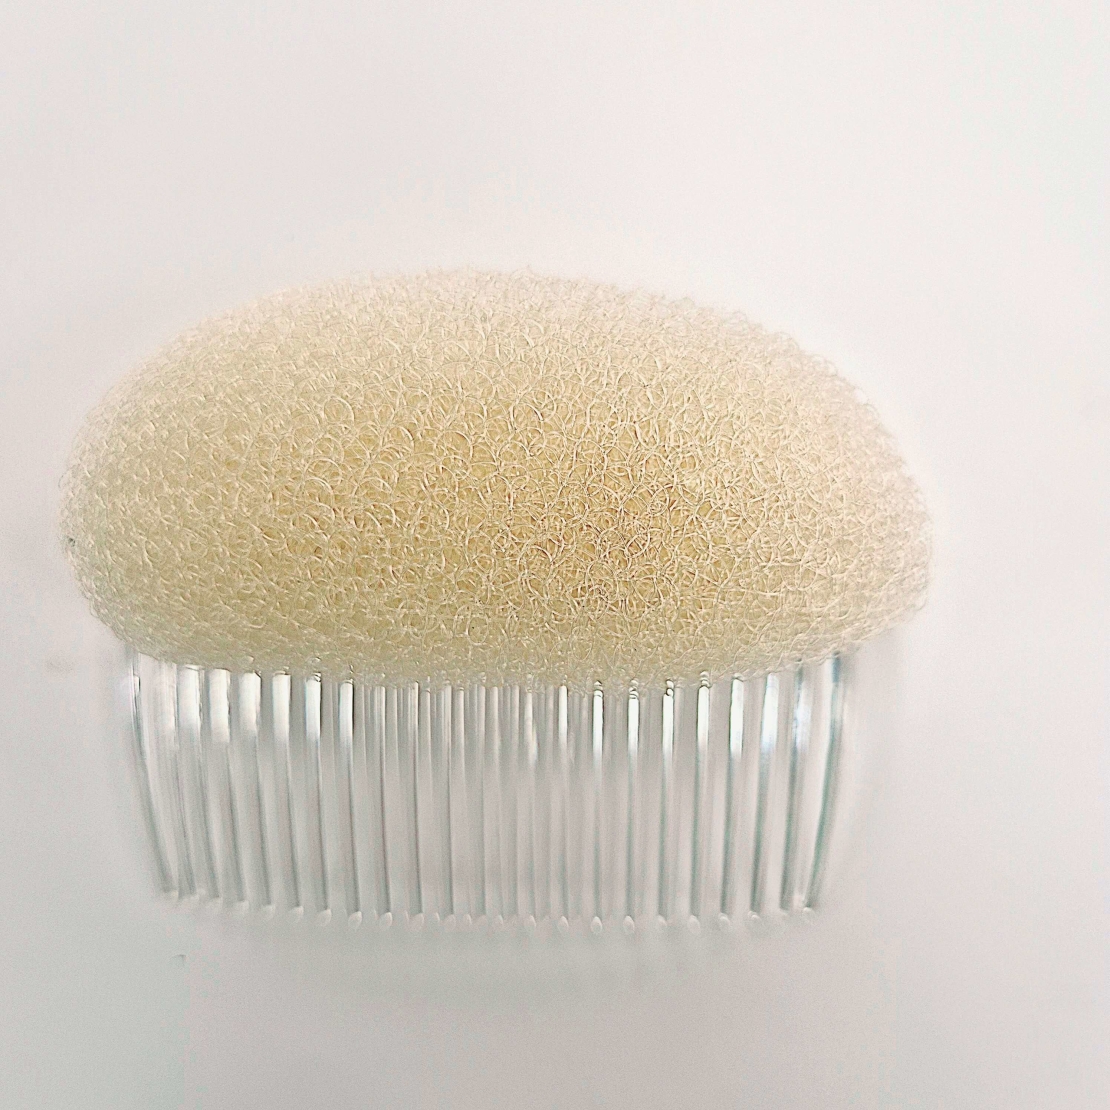 Sponge for filling and lifting hair